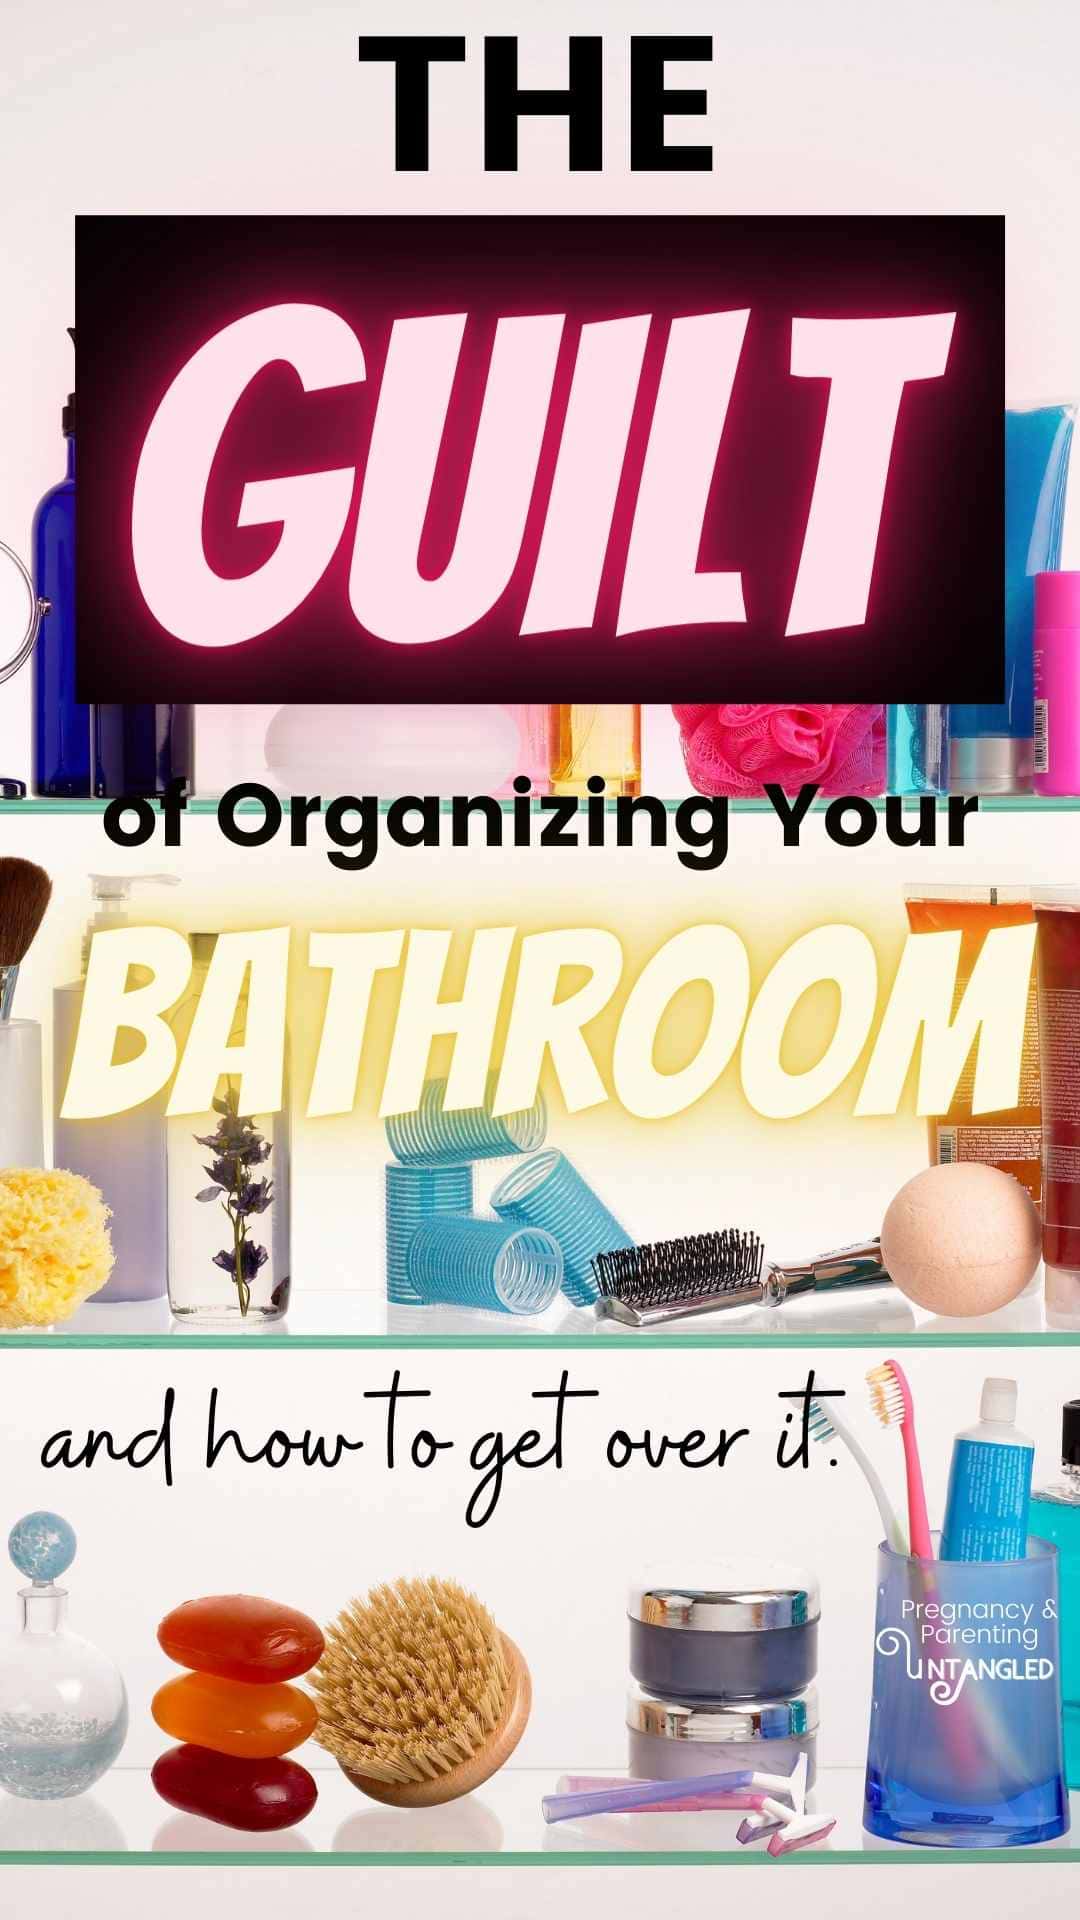 The GUILT of organizing your bathroom, and throwing out beauty products can sometimes paralyze us into not making a change for the good. How do we stop that? via @pullingcurls